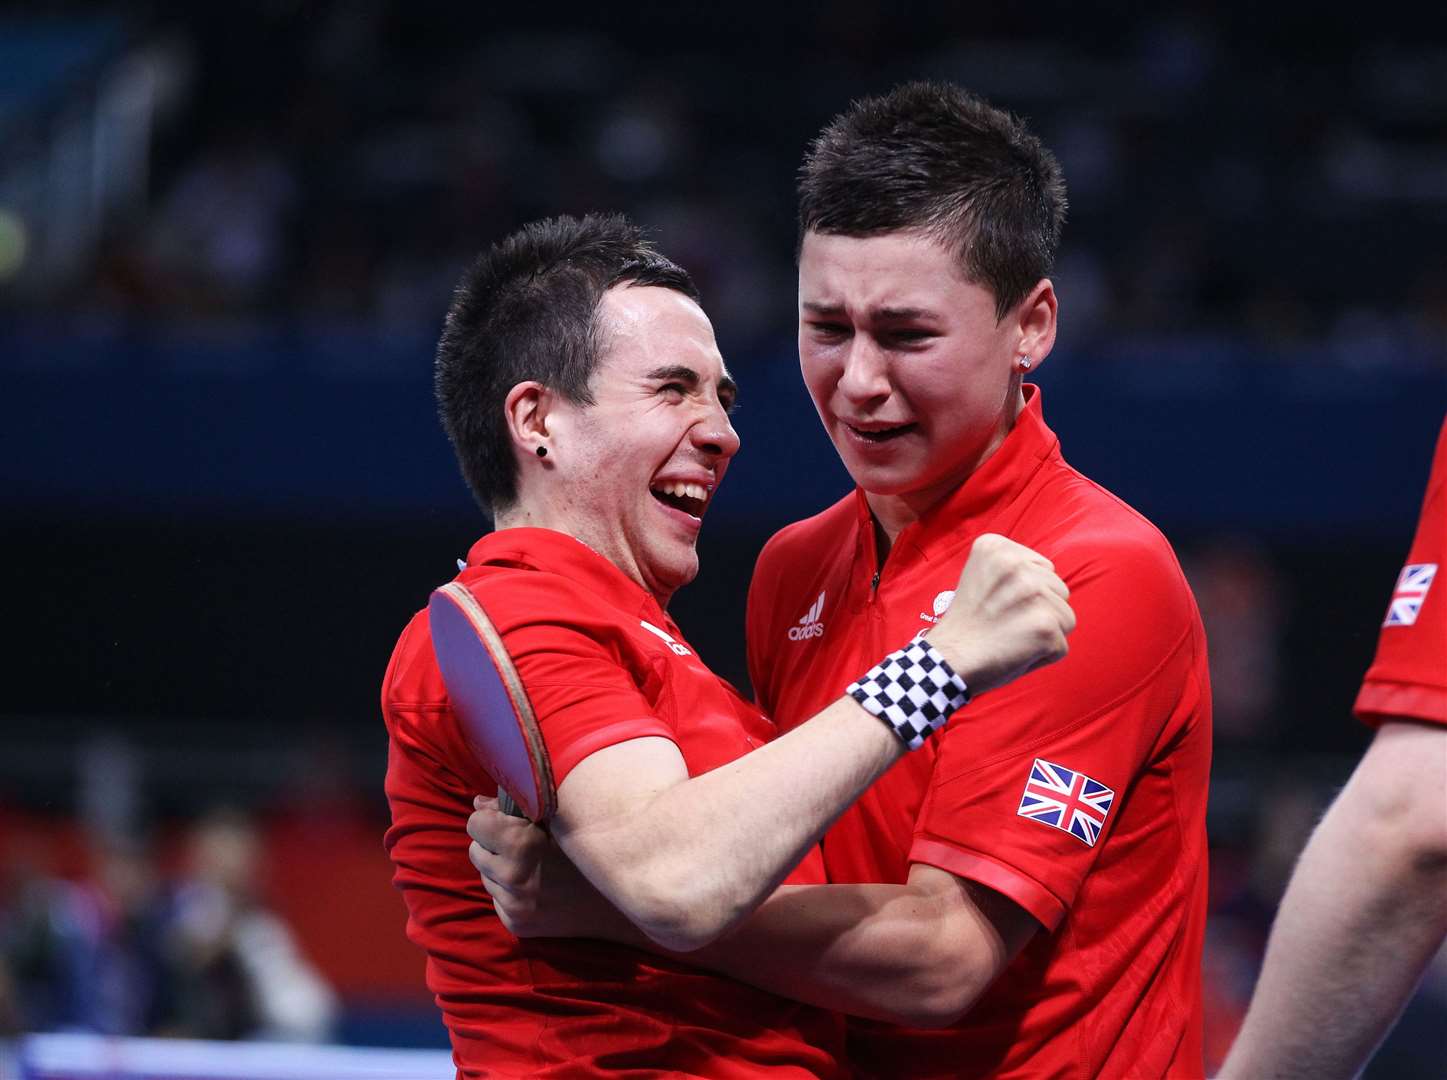 Ross Wilson and Will Bayley celebrate winning the Men's Team Class 6-8 Bronze medal match at Excel Arena during the Paralympic Games in London Picture: Lynne Cameron/PA Wire